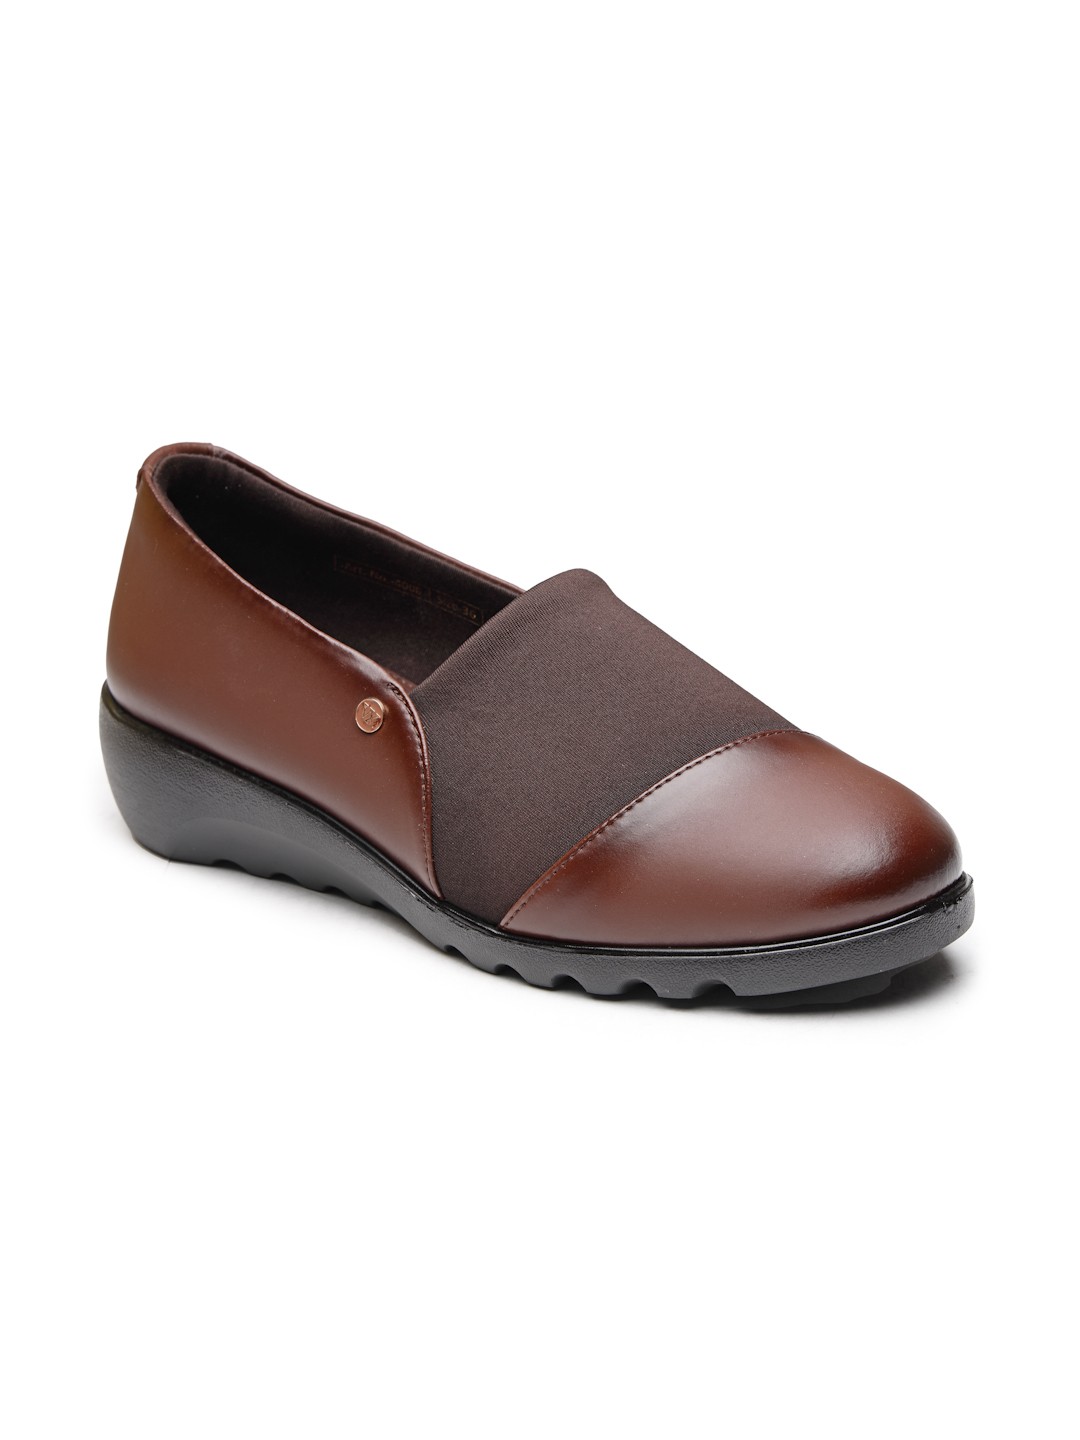 Buy Von Wellx Germany Comfort Women's Brown Casual Shoes Ayla Online in Faridabad